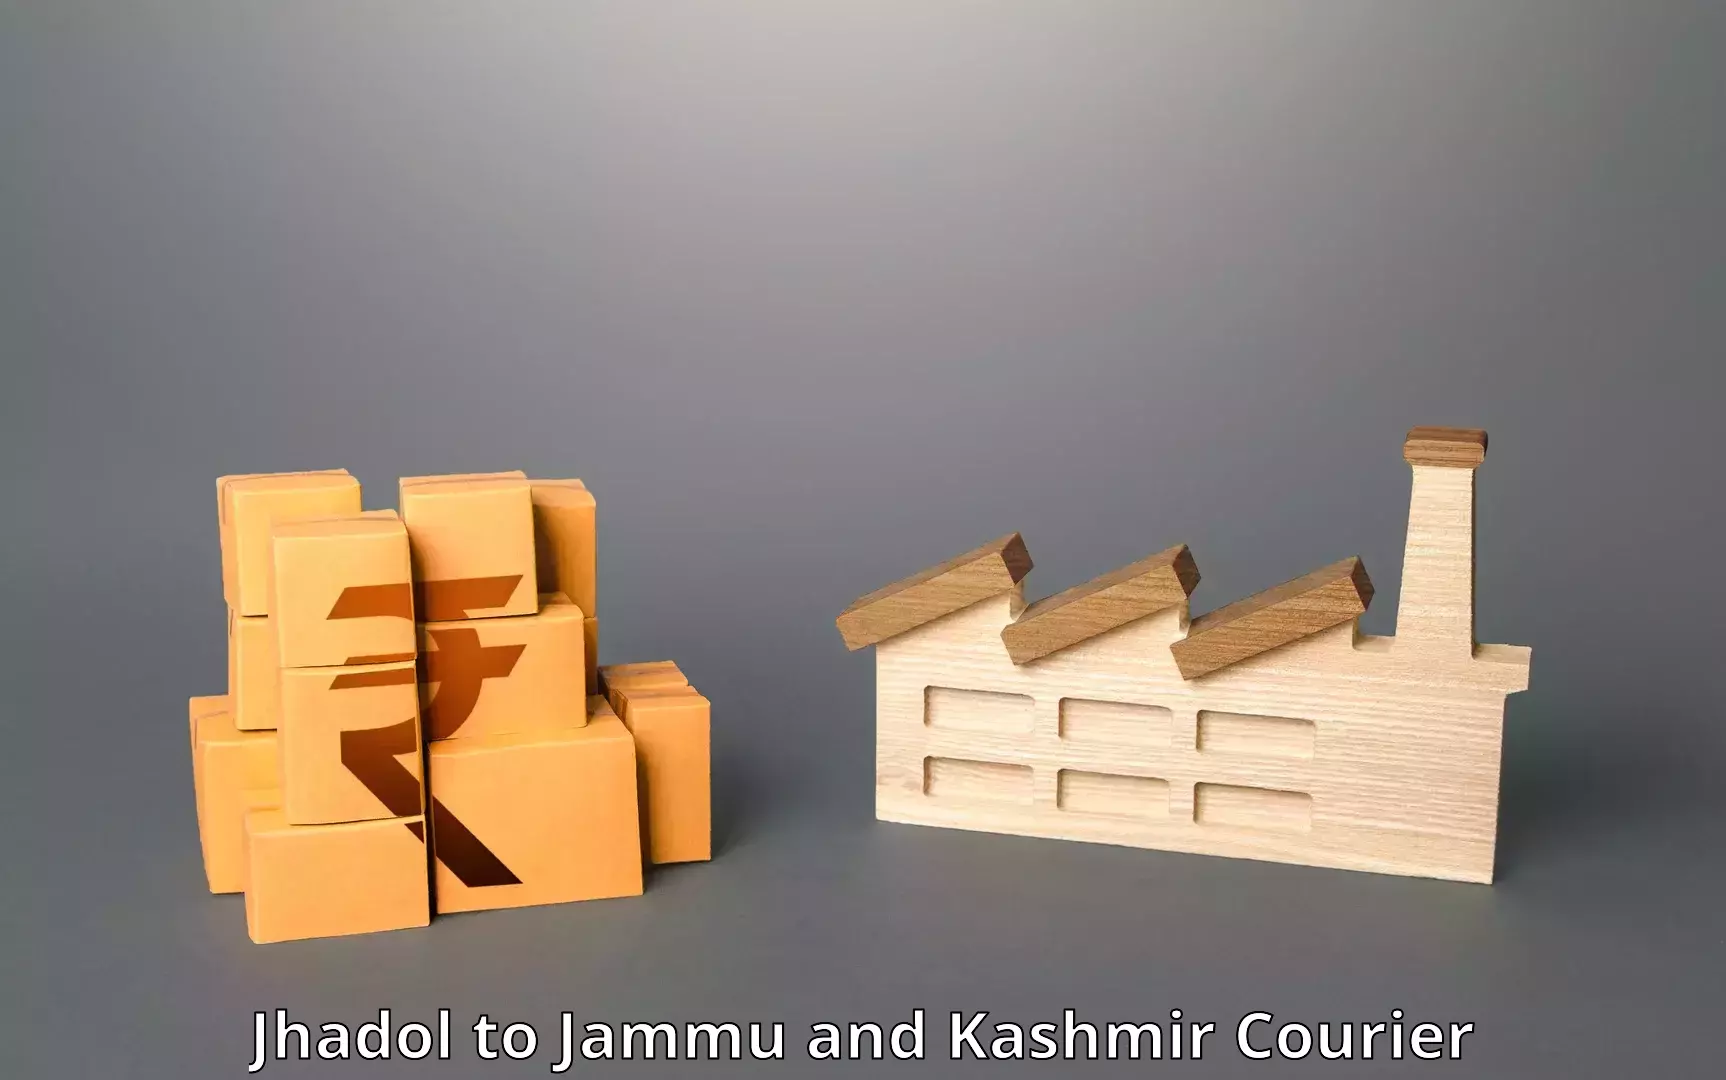 Express delivery capabilities Jhadol to IIT Jammu